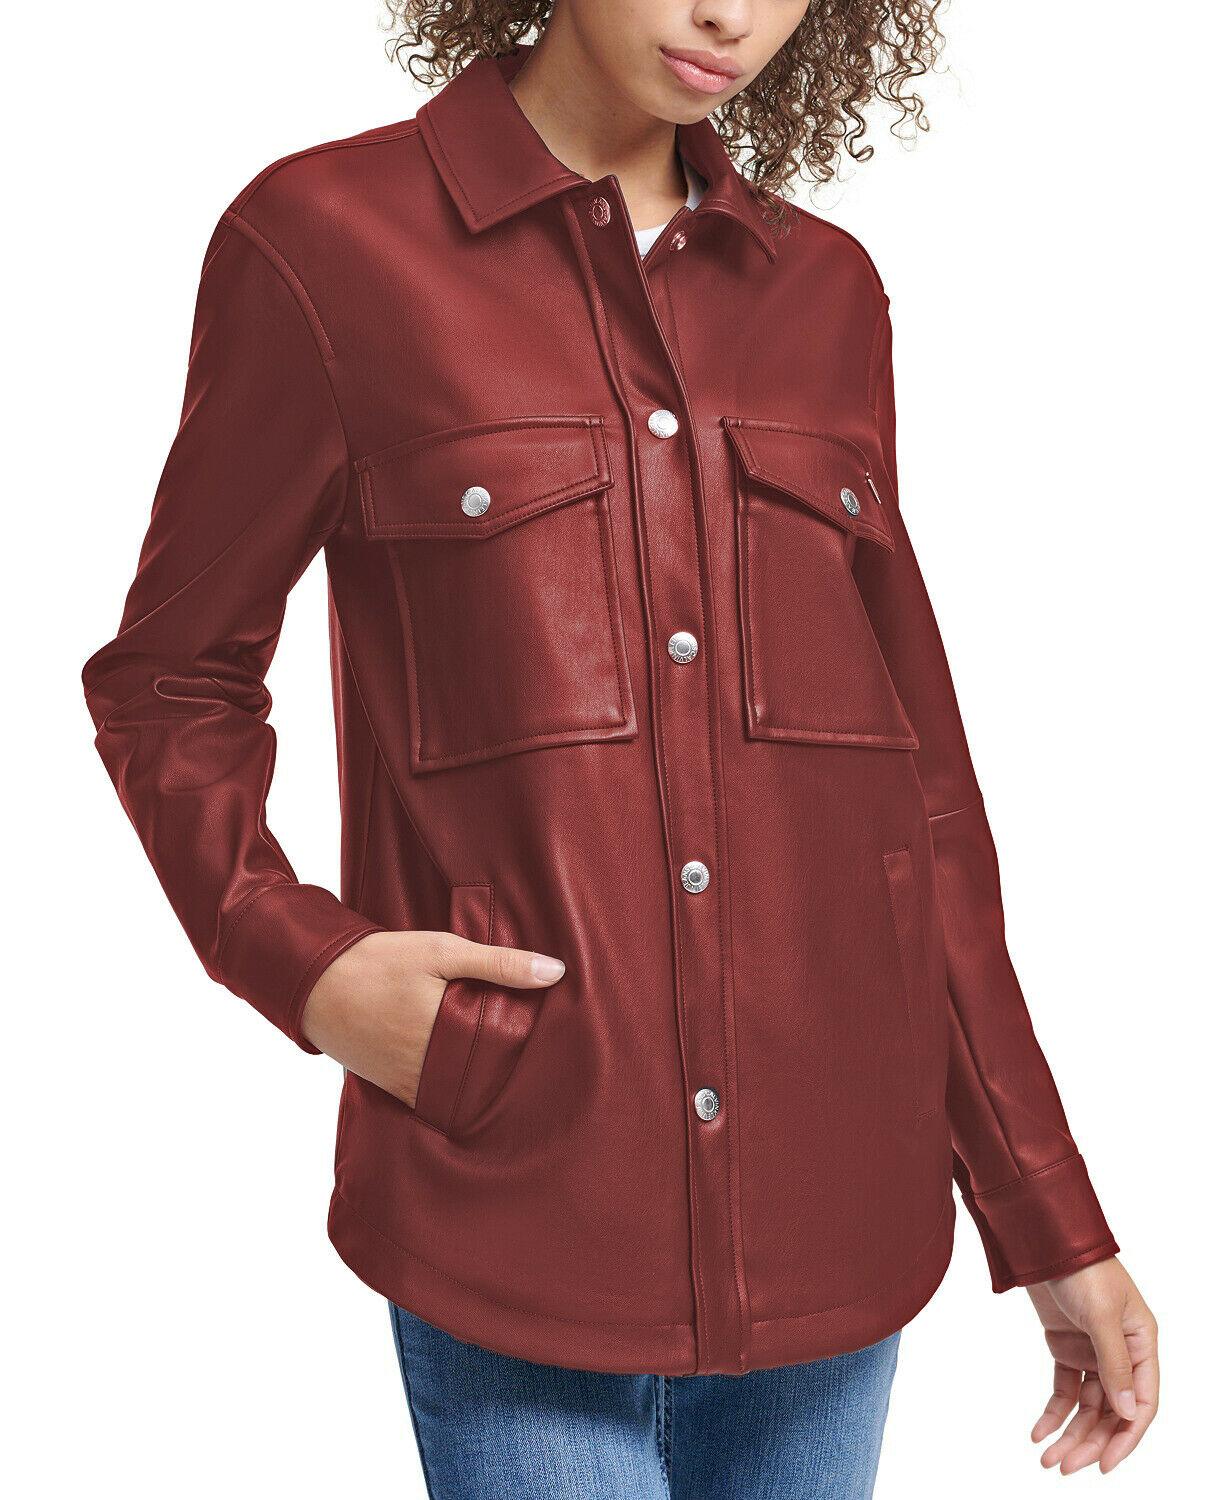 CALVIN KLEIN JEANS Women's Faux-Leather Button-Front Shirt Jacket Wine S - SVNYFancy